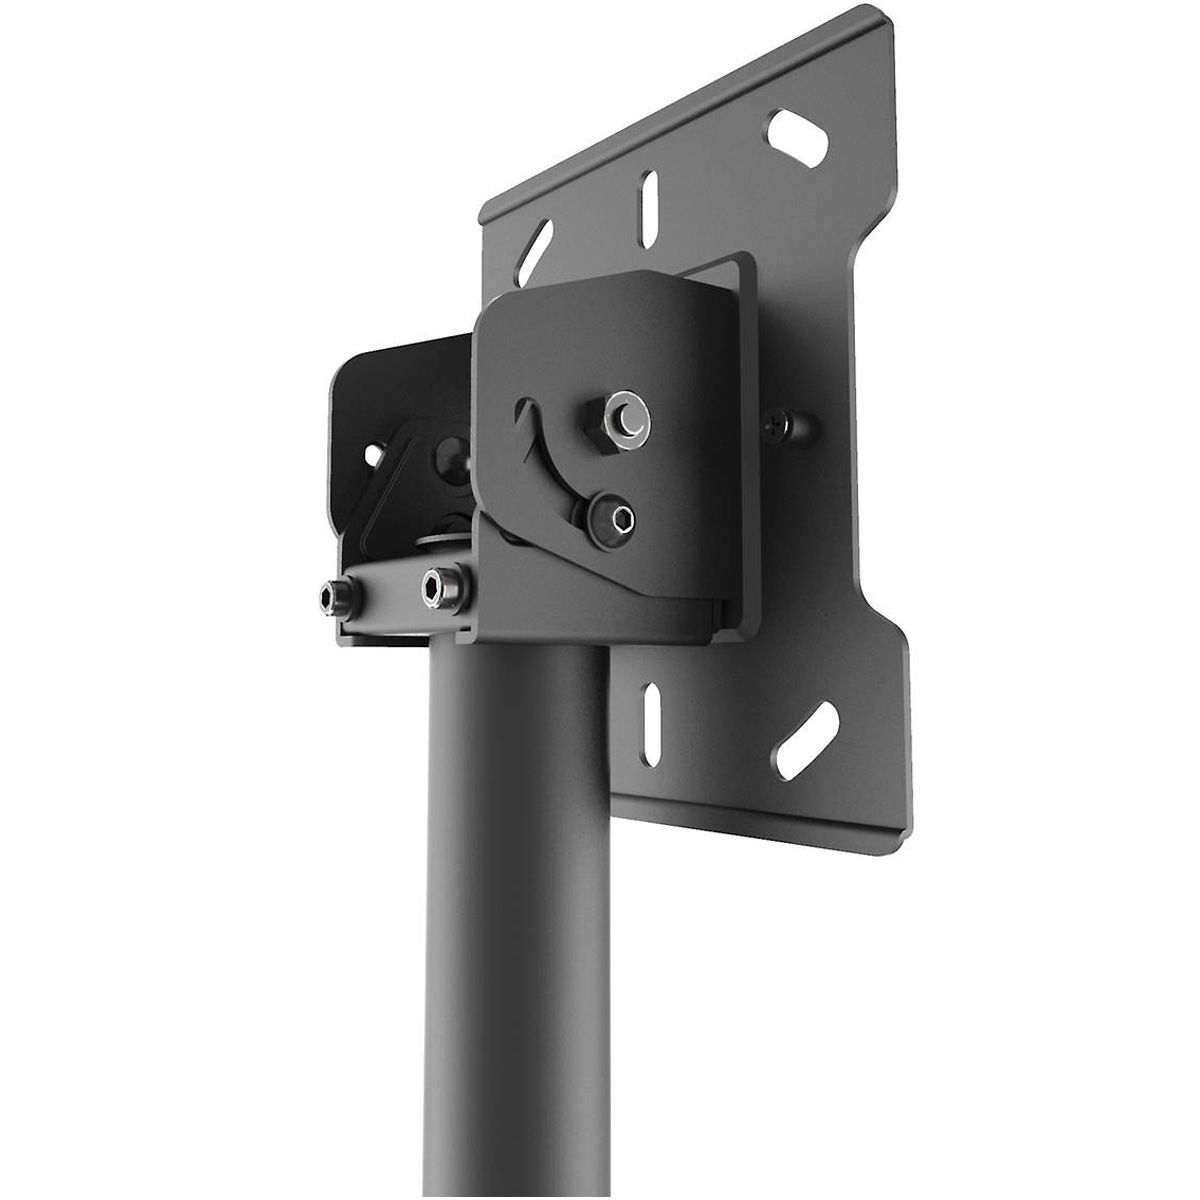 Kanto CM600 Full Motion Ceiling Mount - close-up of ceiling mount in 90 degree angled orientation